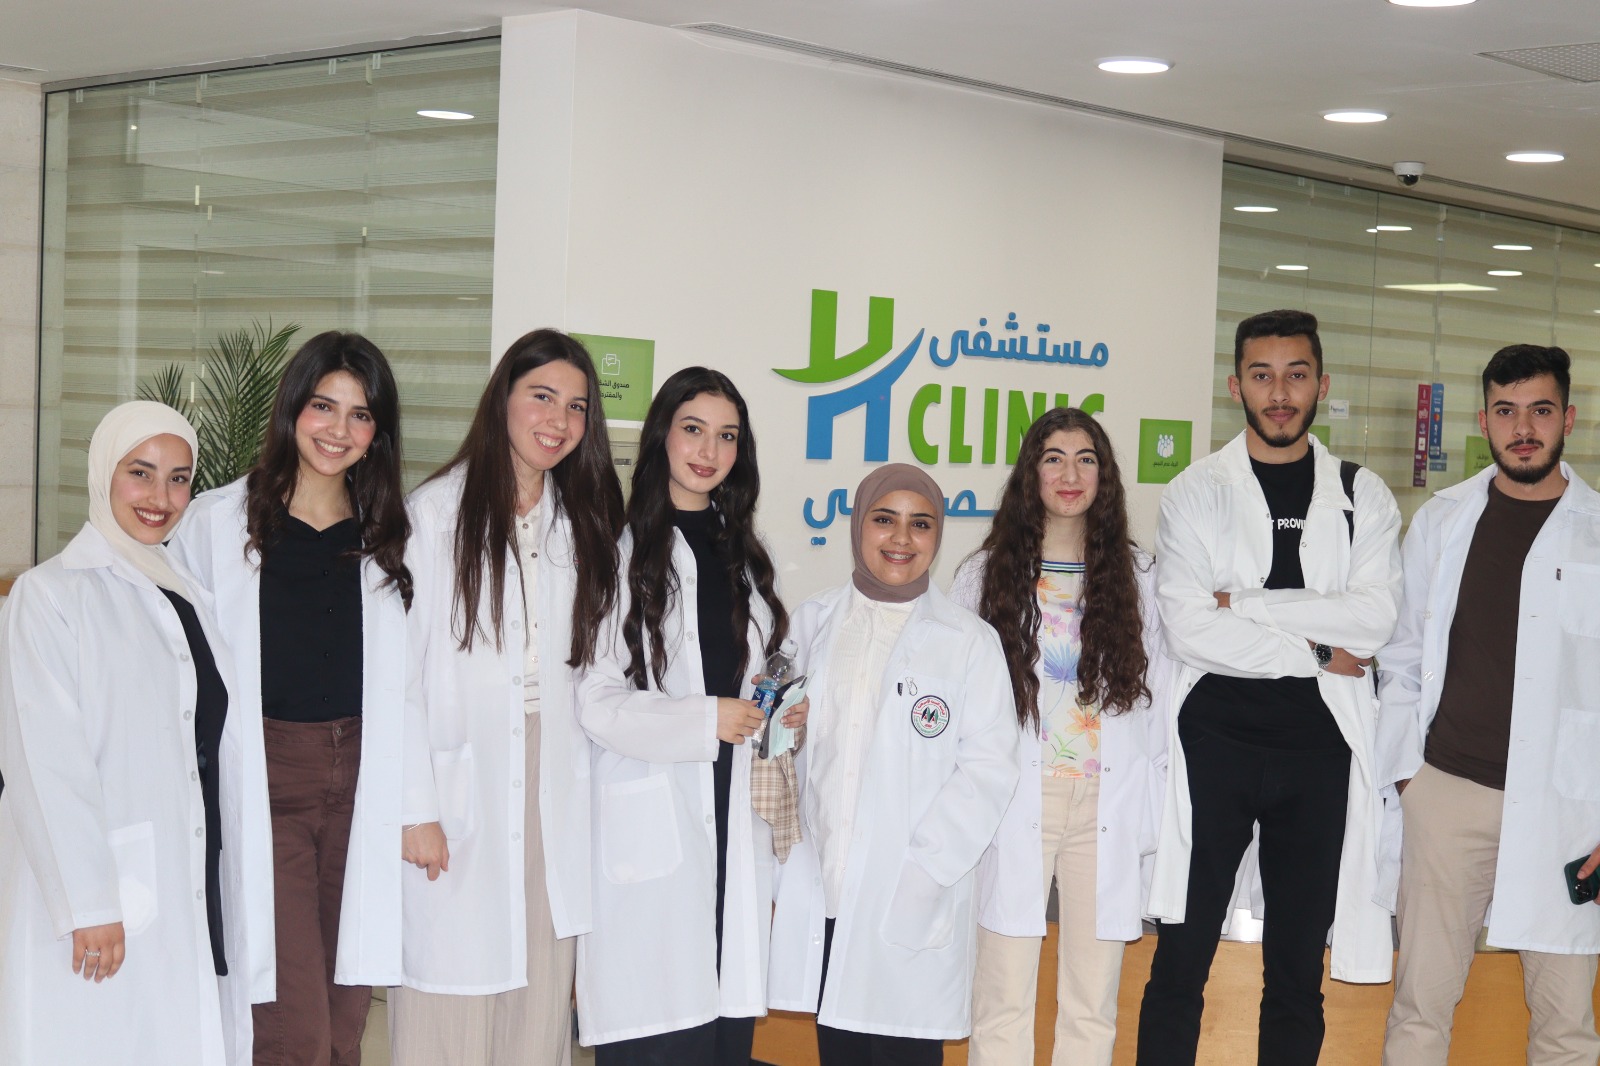 An AAUP Group of Medical Students in Ramallah Complete Practical Training at the Hclinic Specialty Hospital